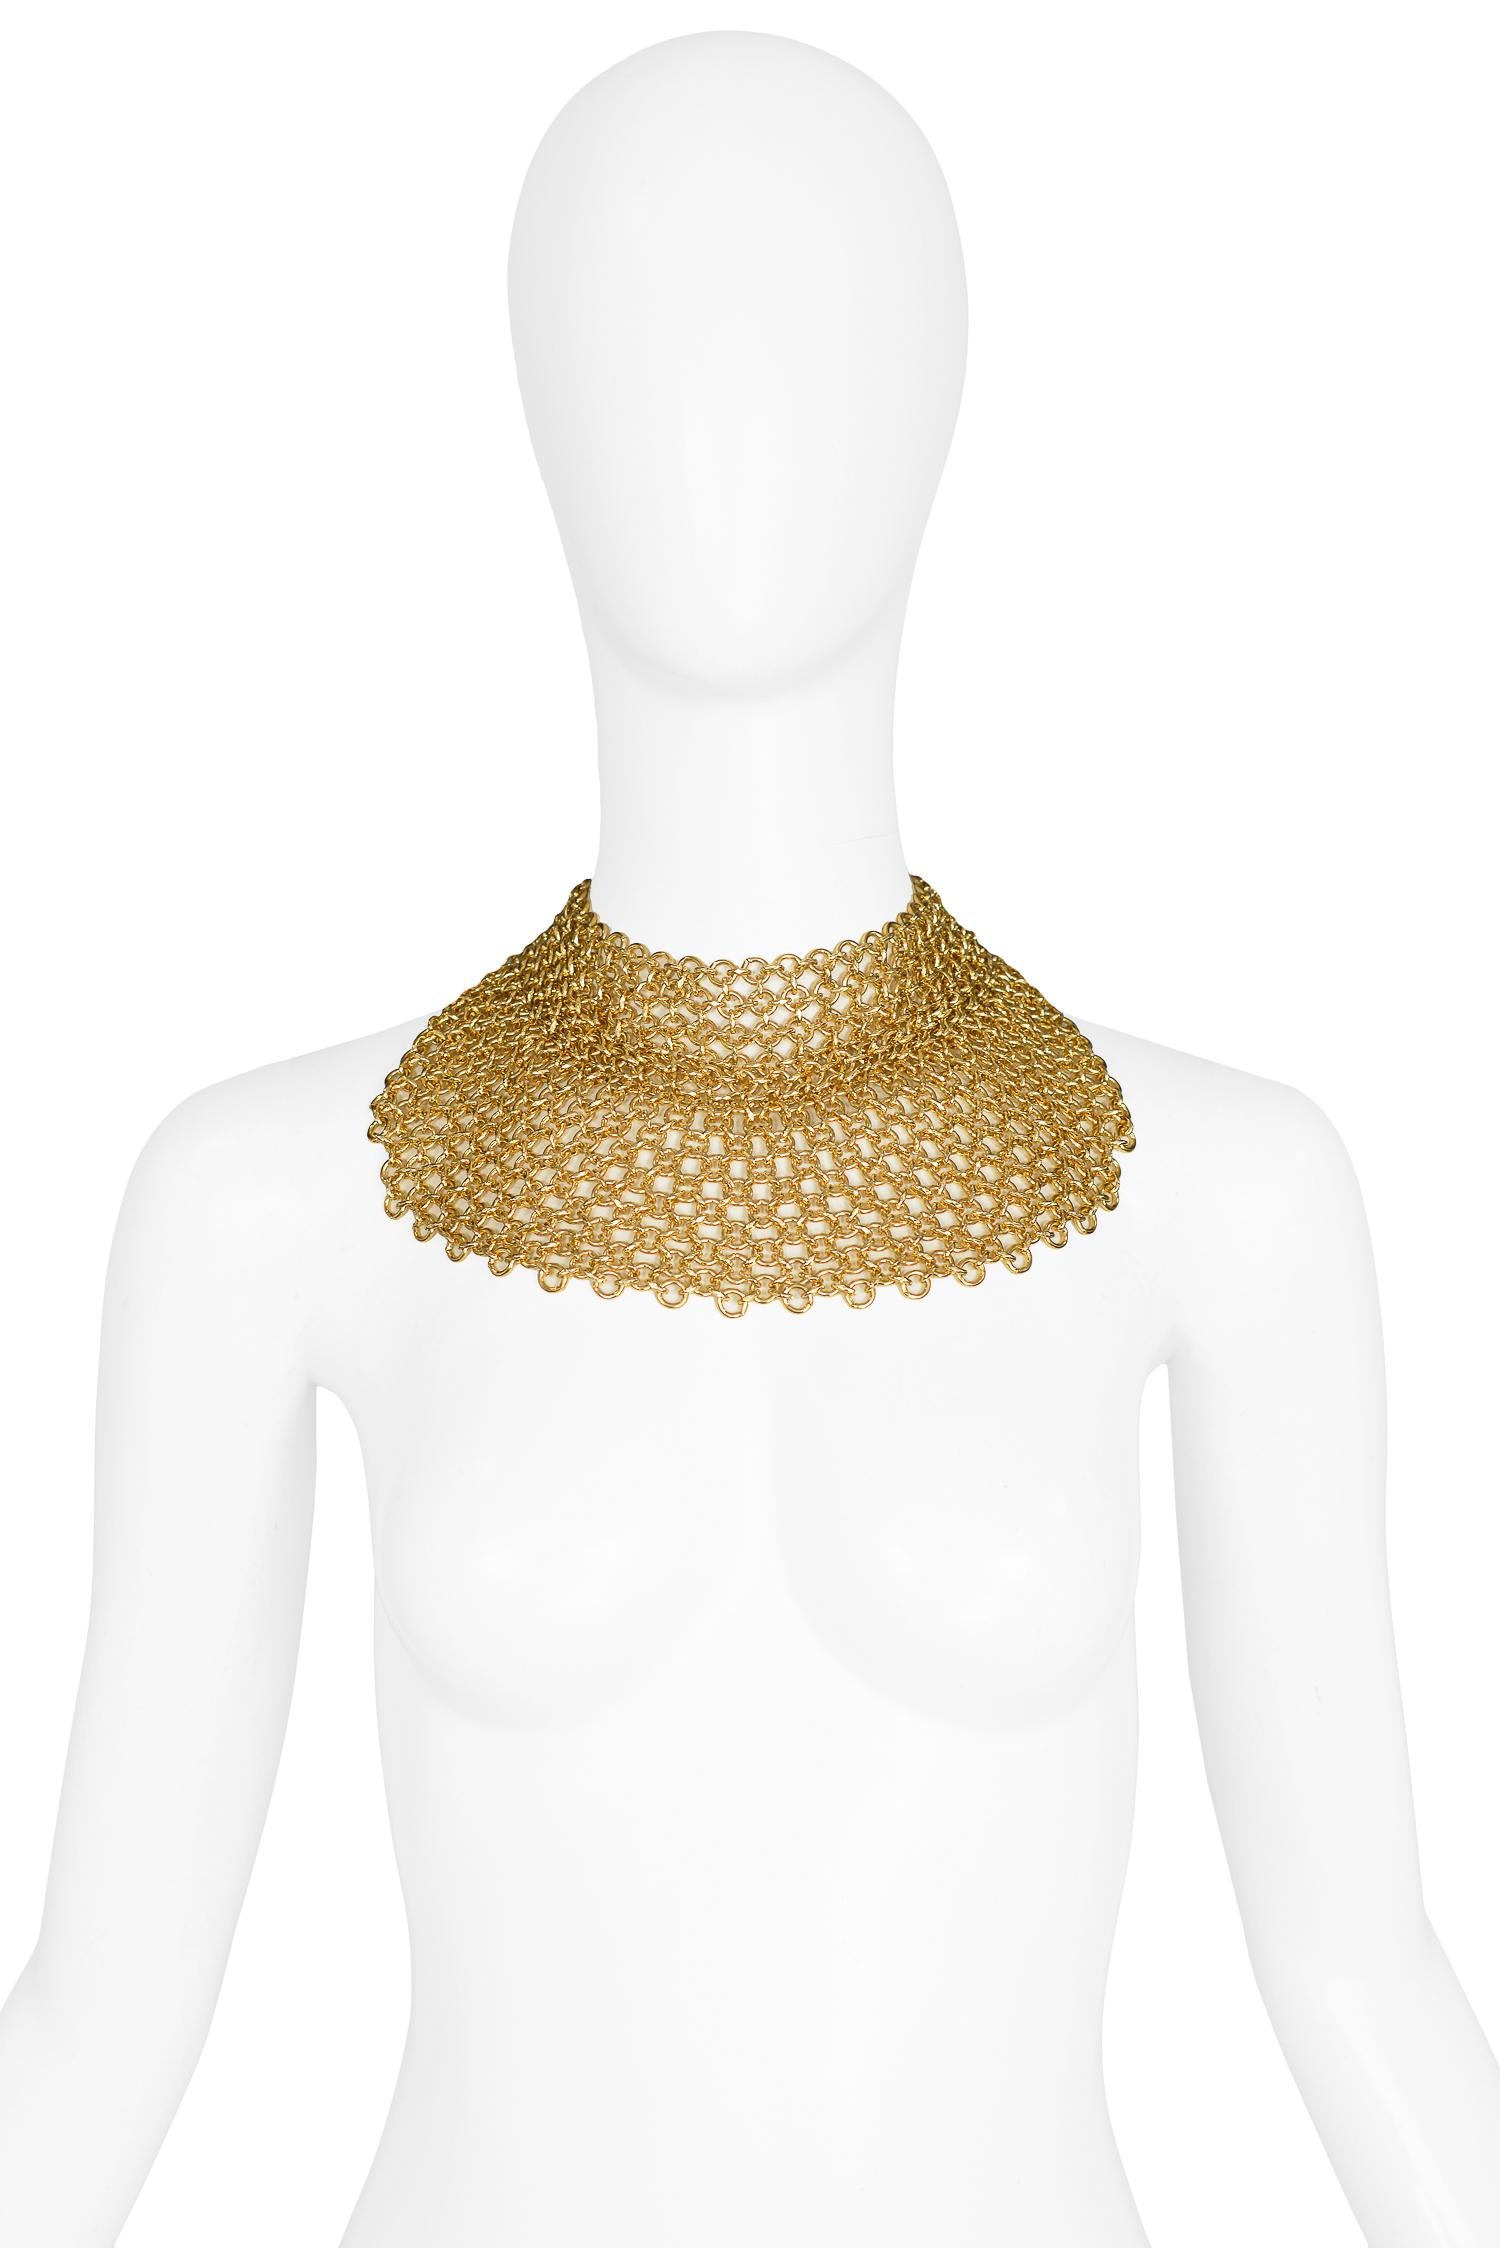 Vintage Gianni Versace gold-tone chainmail statement choker featuring a hook closure with decorative charm detail. 

Excellent Condition.